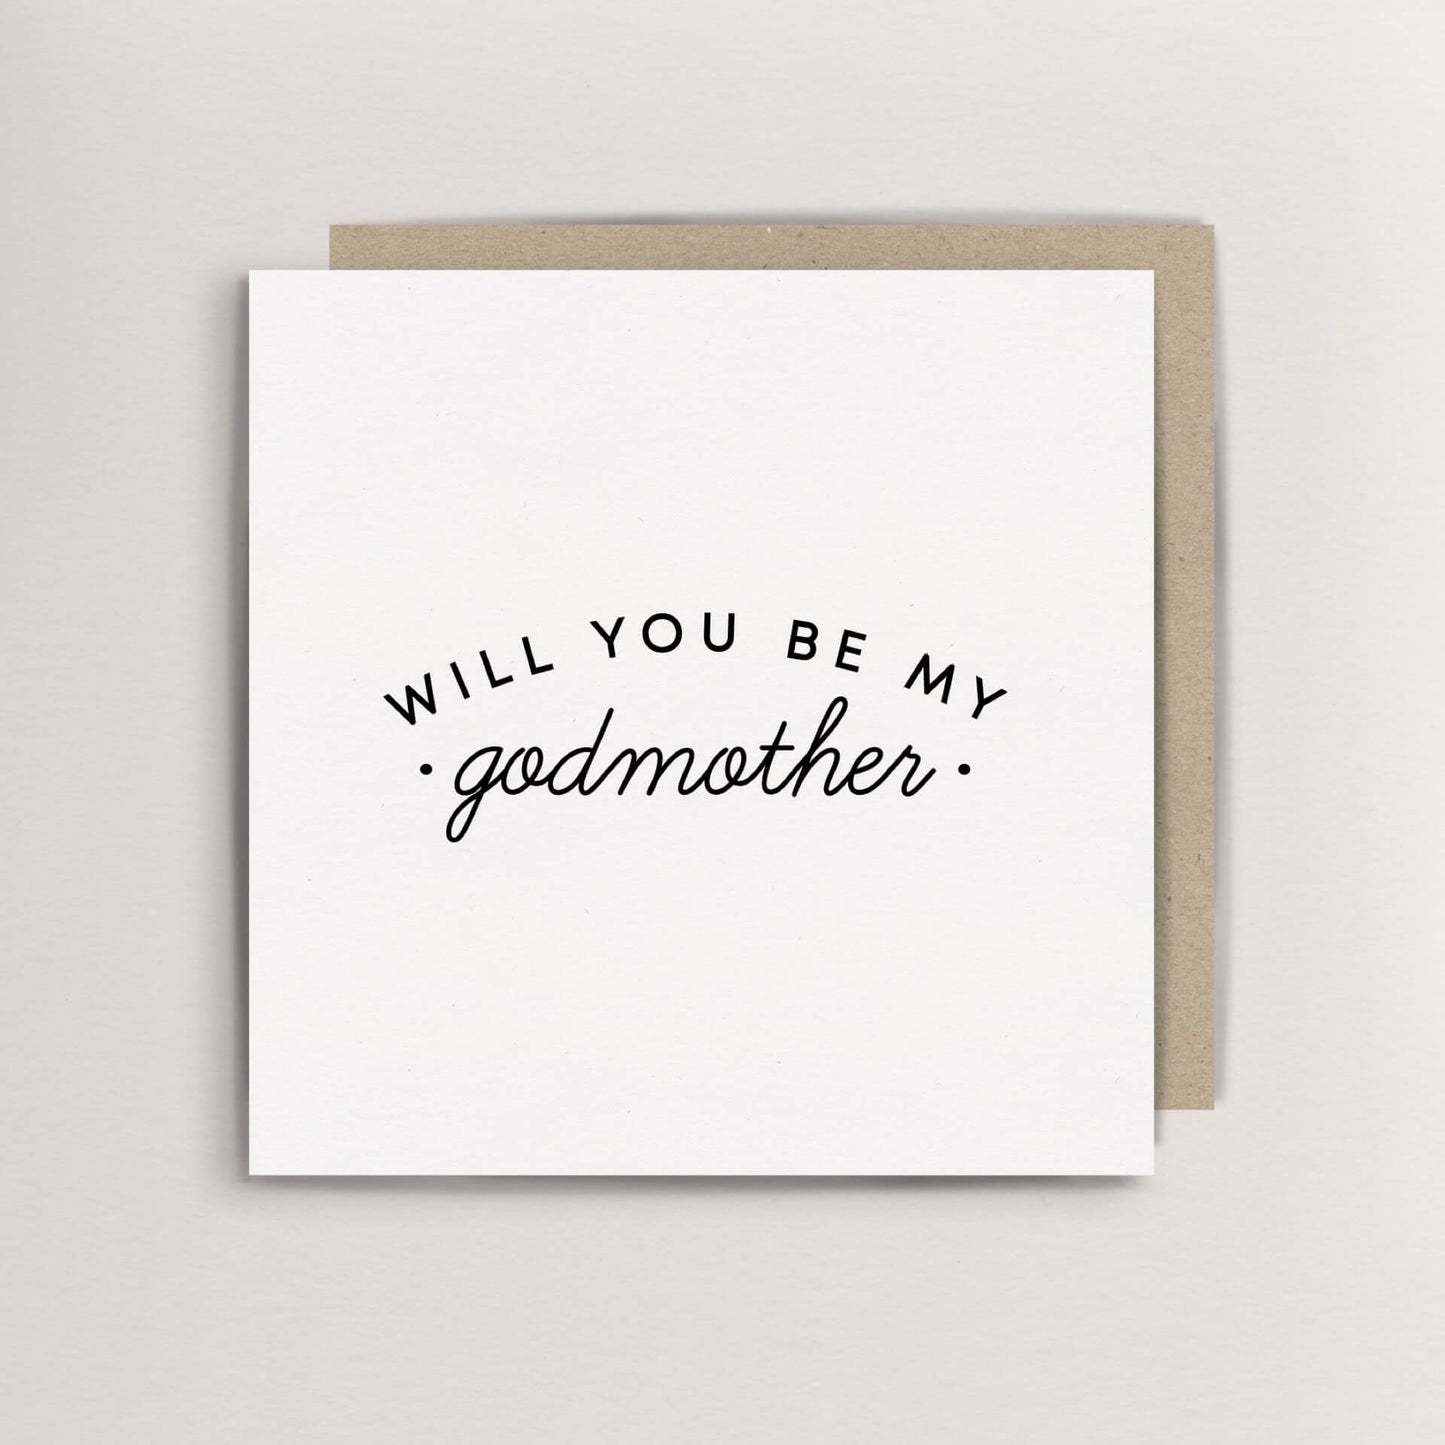 Will you be my godparent card